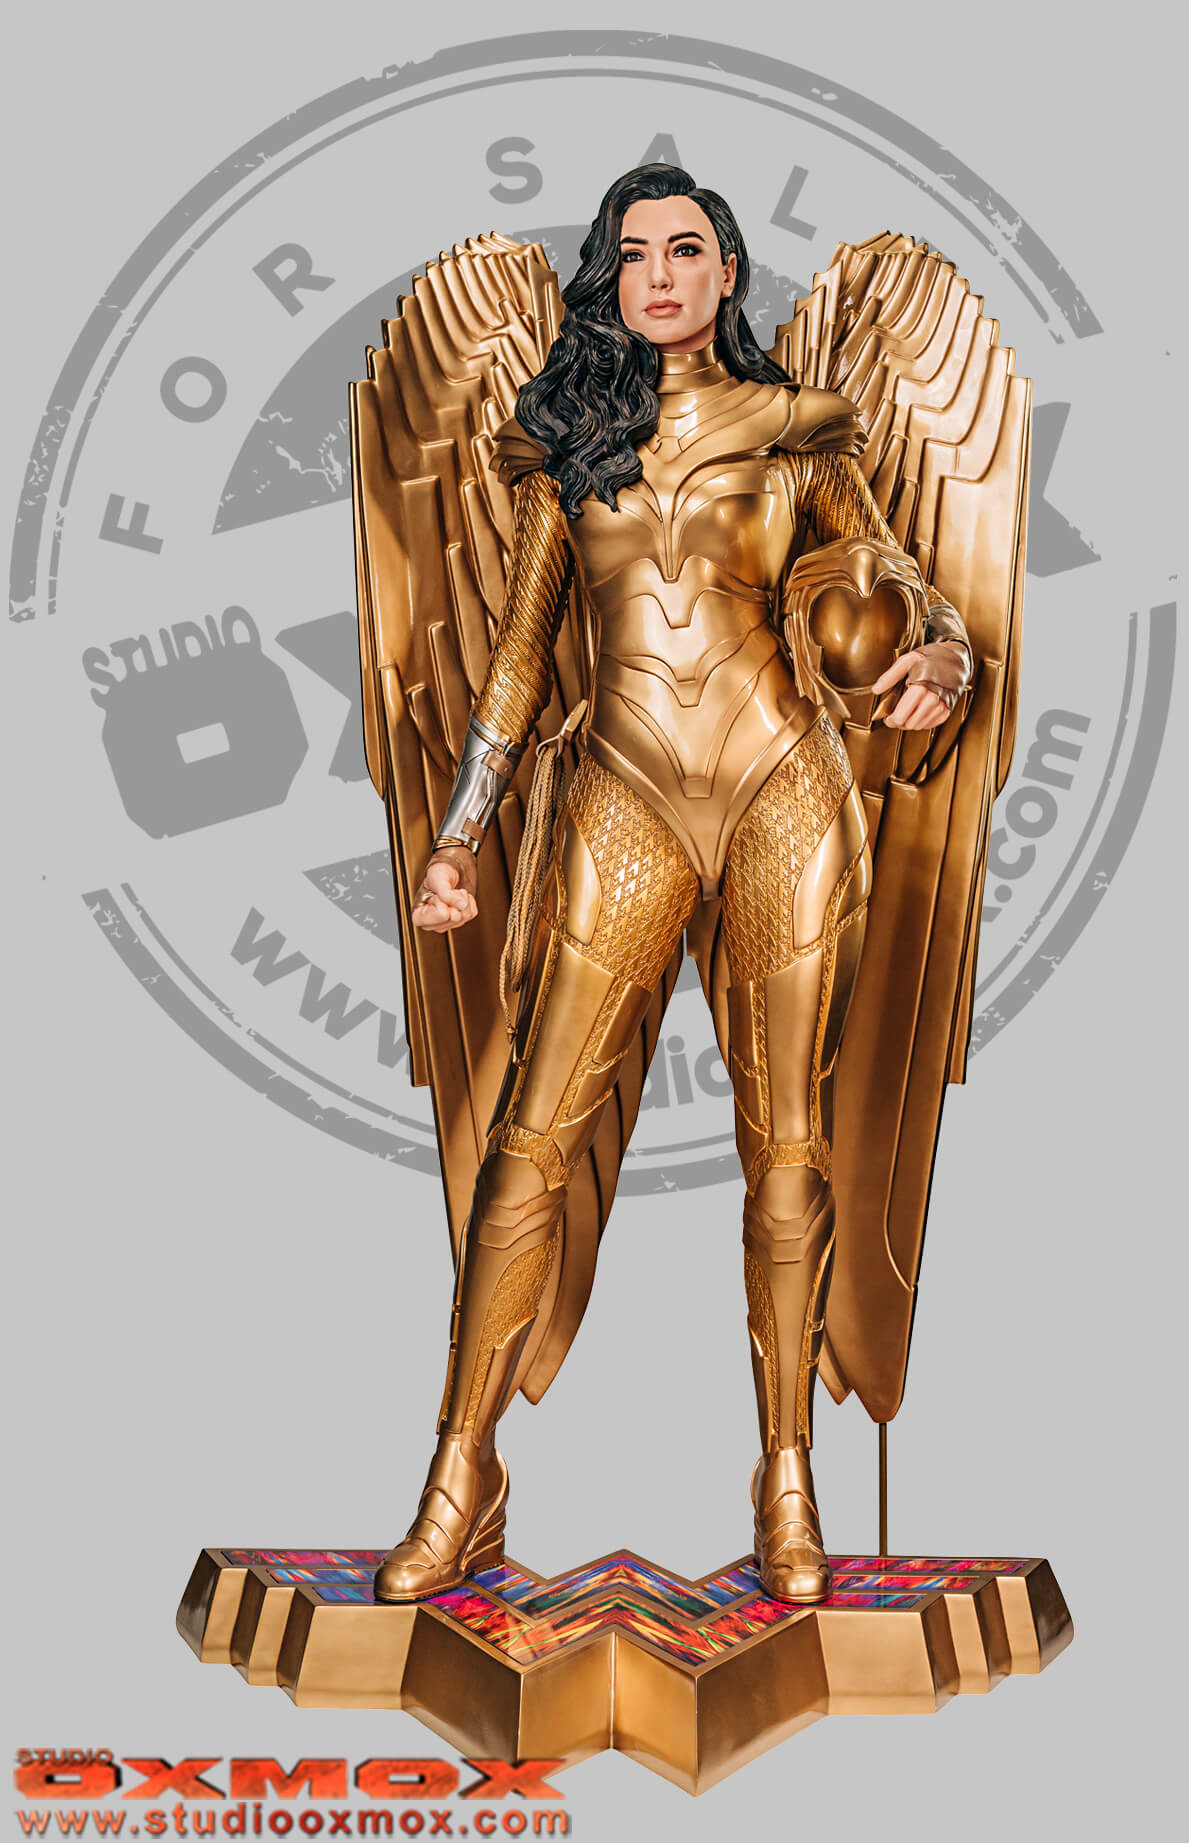 wonder woman 1984 life size statue for sale